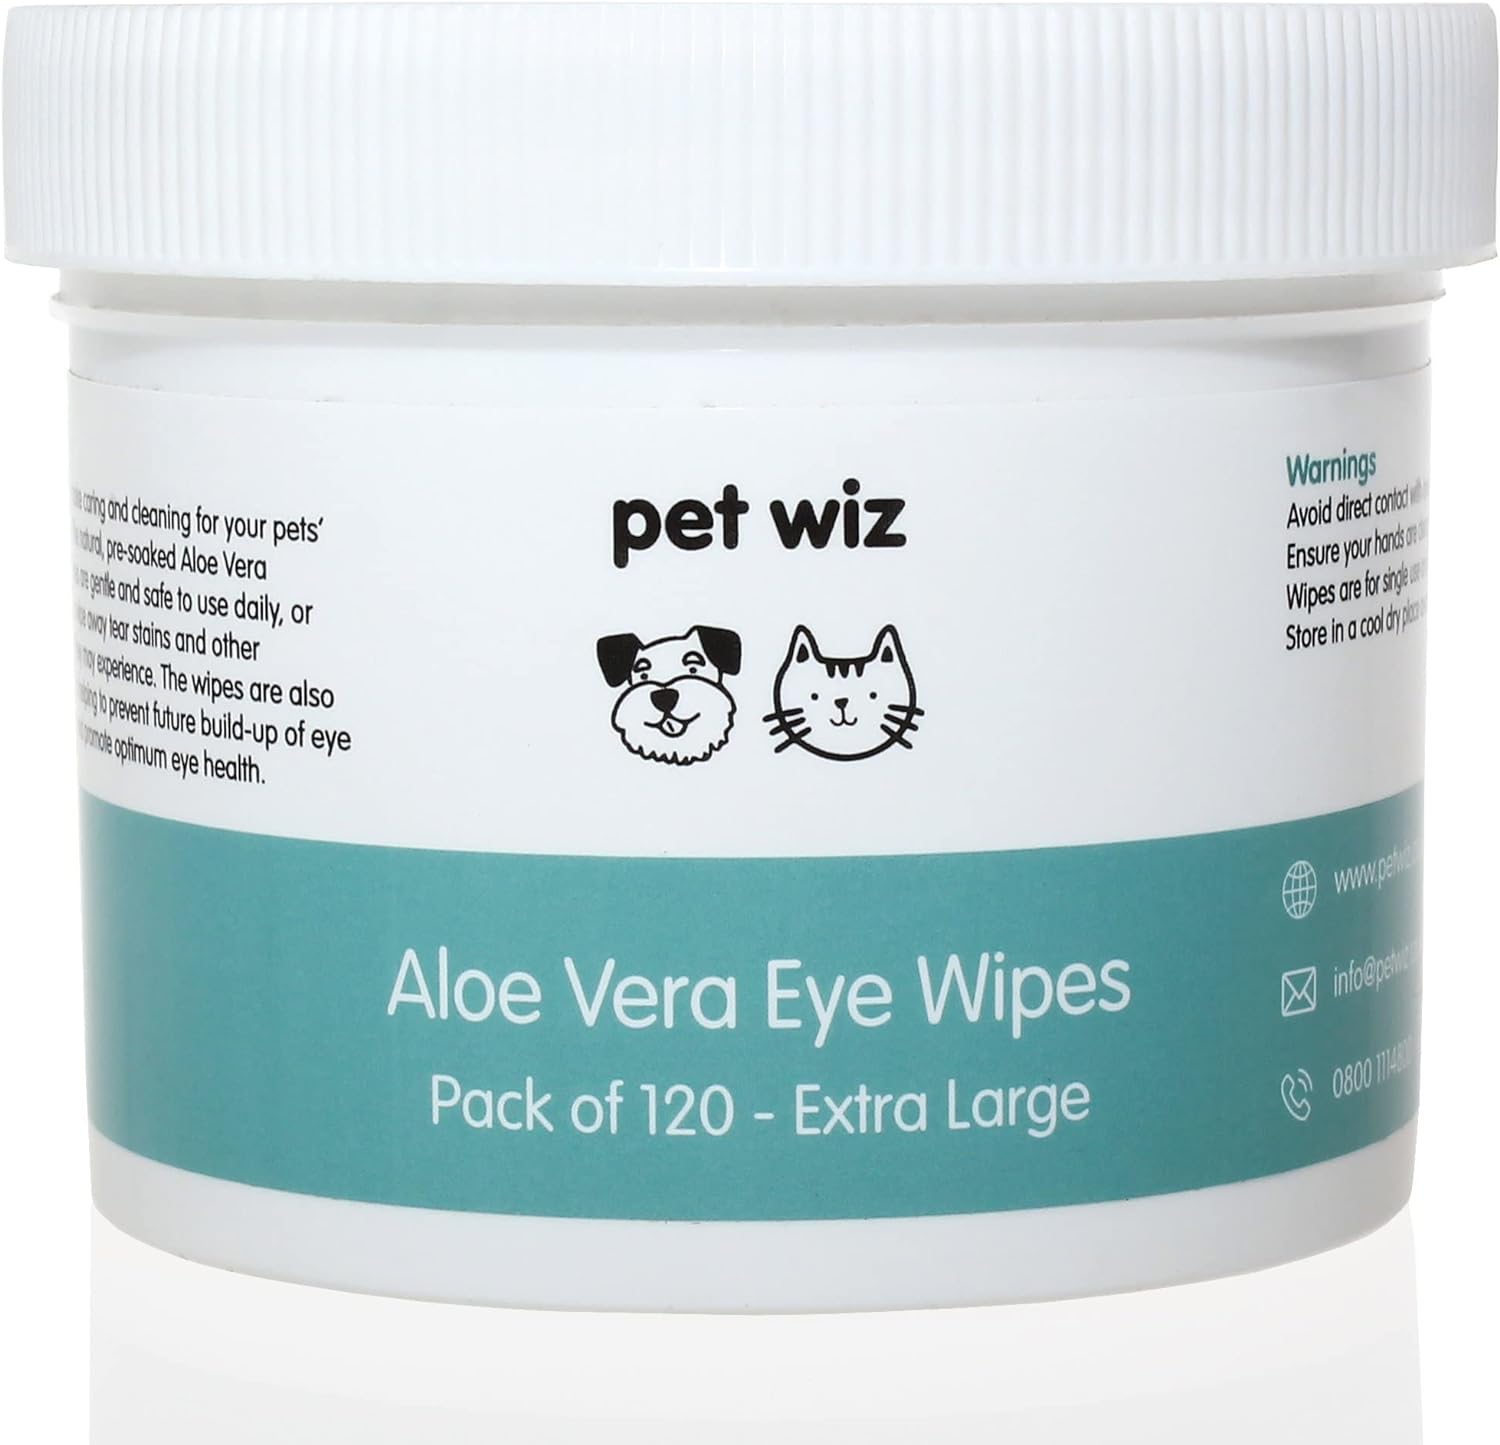 pet wiz Aloe Vera Eye Wipes for Cleaning Dogs & Cats - Extra Large